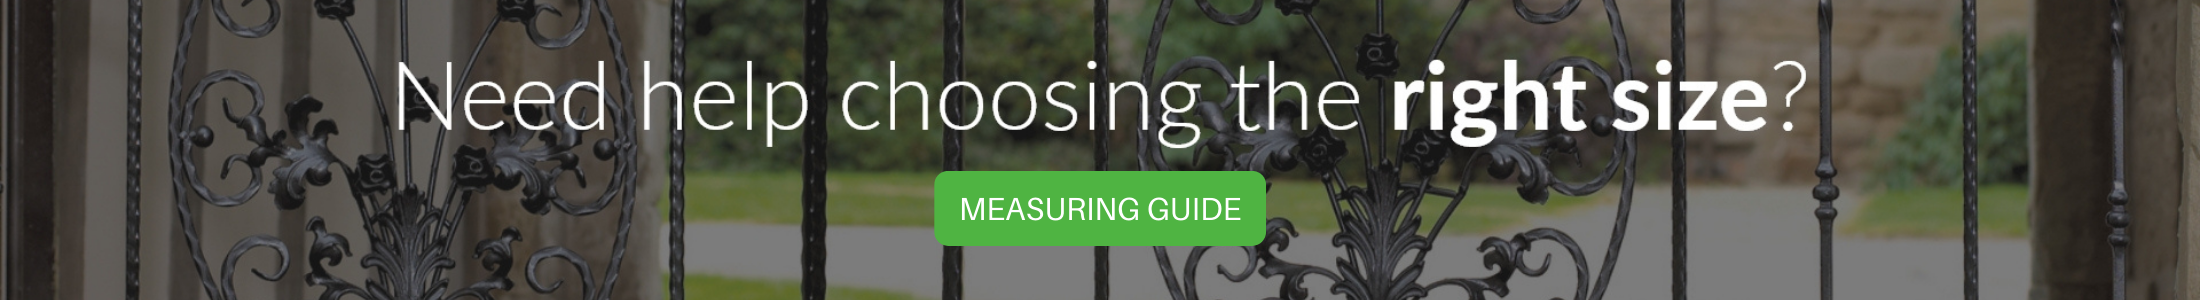 View the metal railing measuring guide - Click here